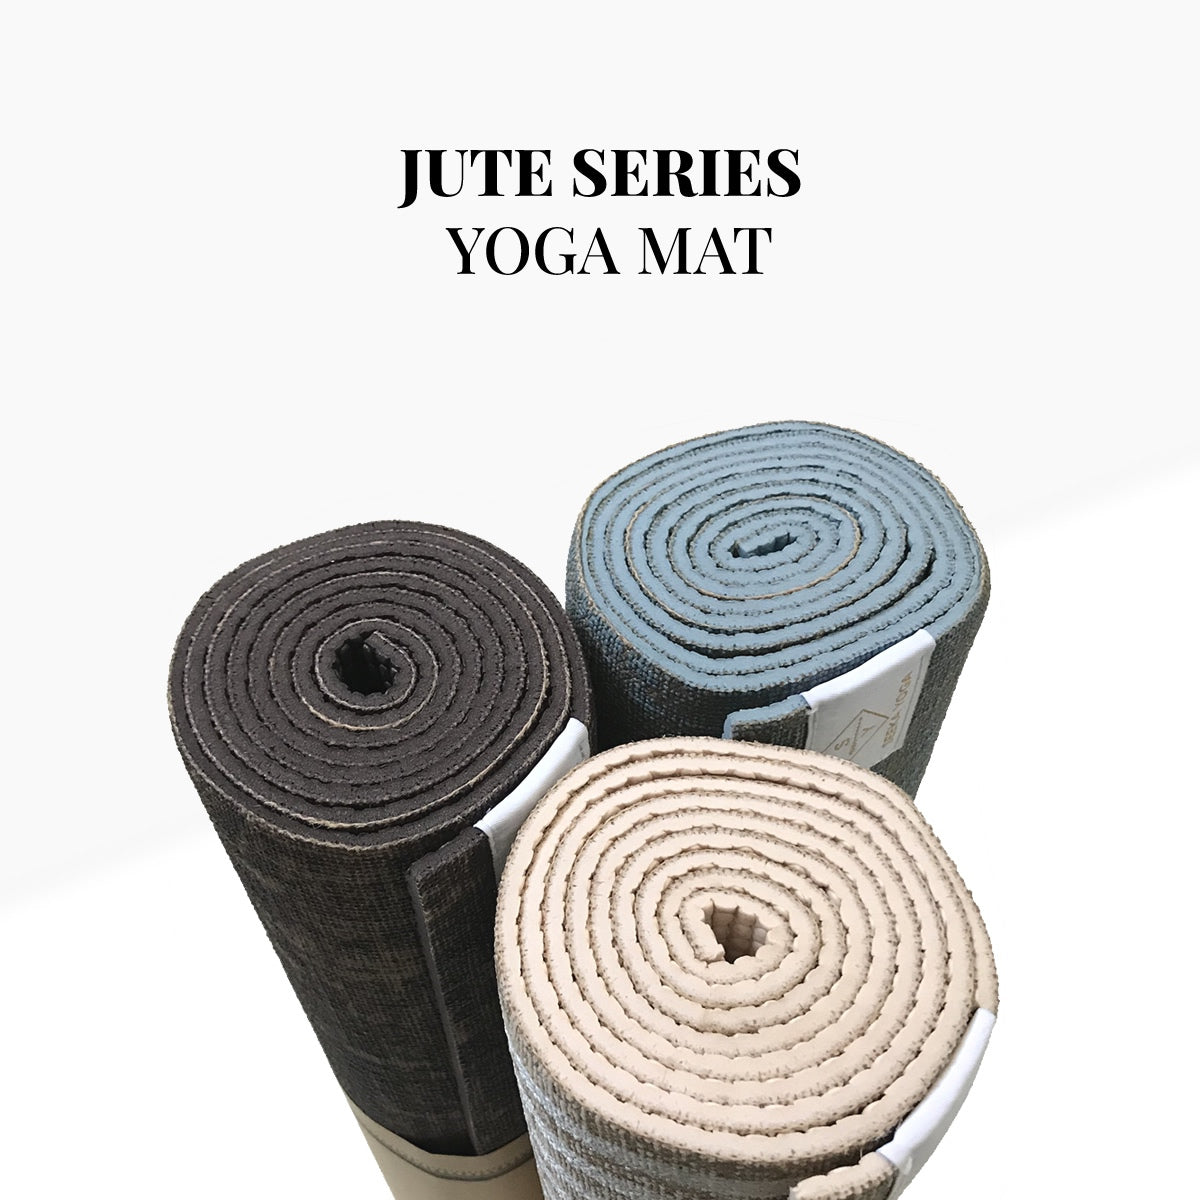 Jute and Natural Tree Rubber Yoga Mat - Flower of Life - Billy the